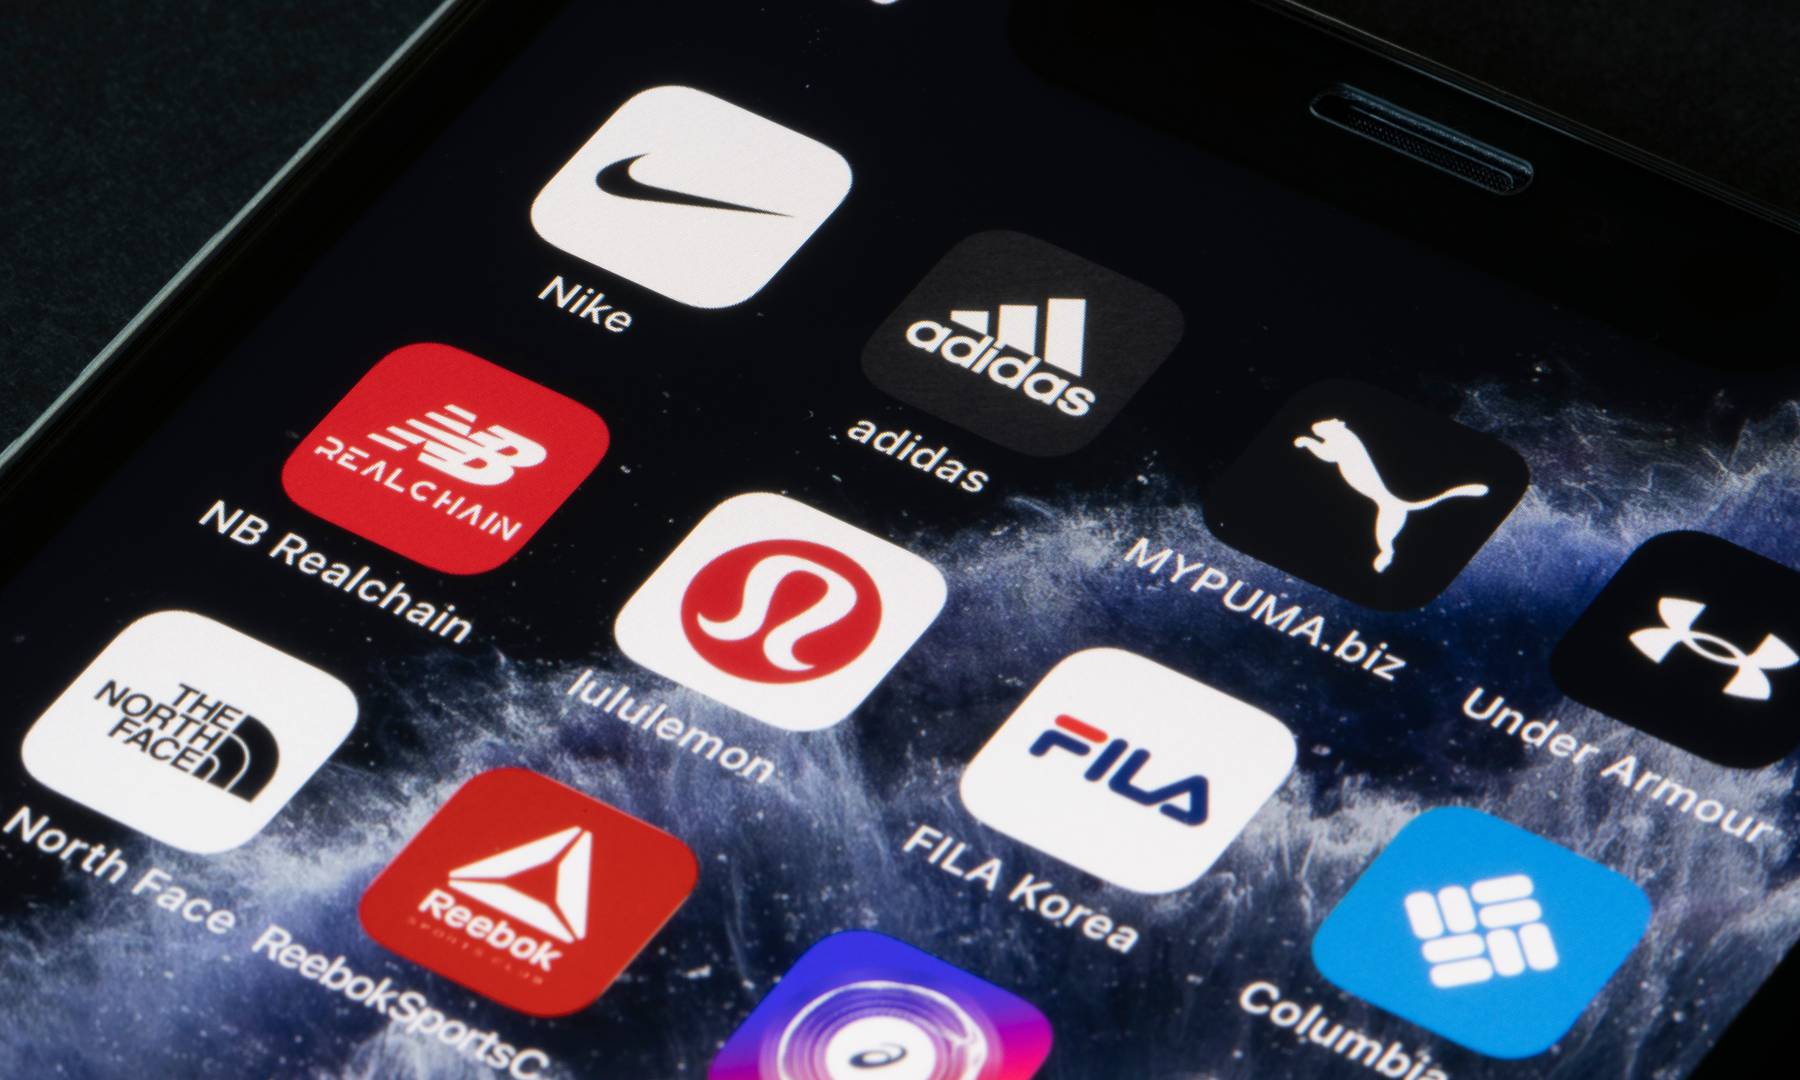 An array of apps from different activewear companies are displayed on a phone screen.